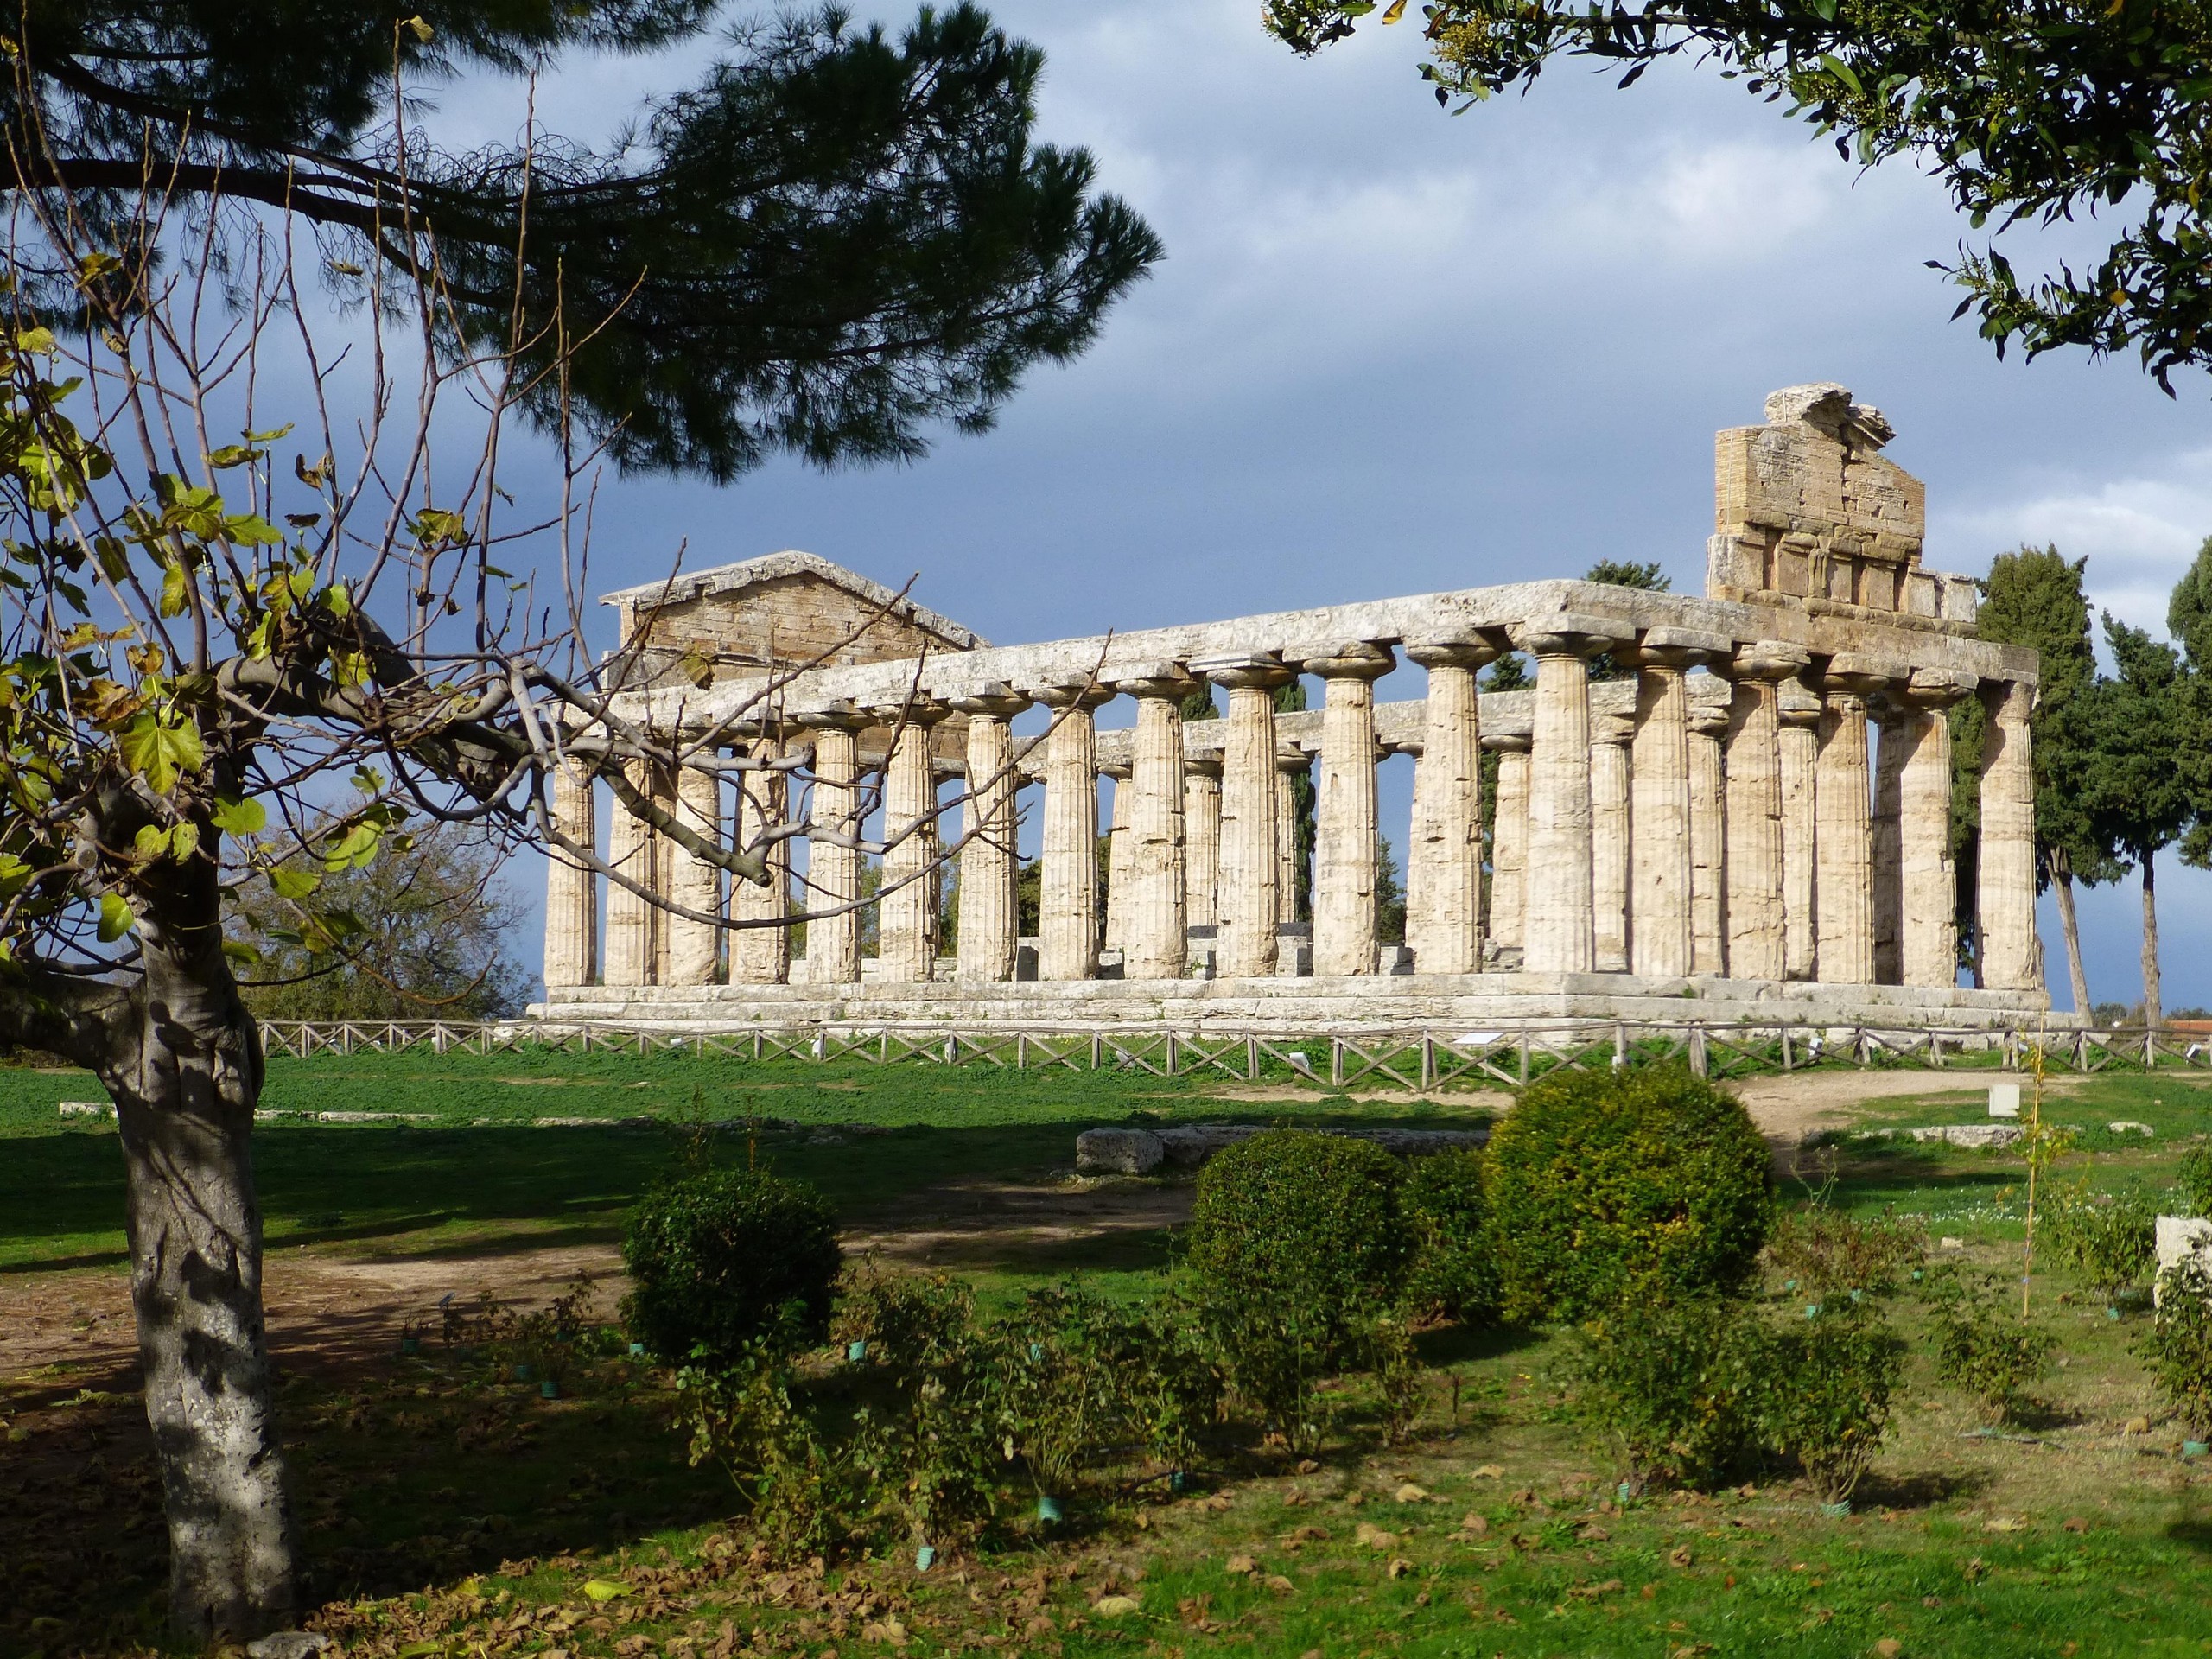 Beautiful old building in Paestum, seen while on a self-guided tour